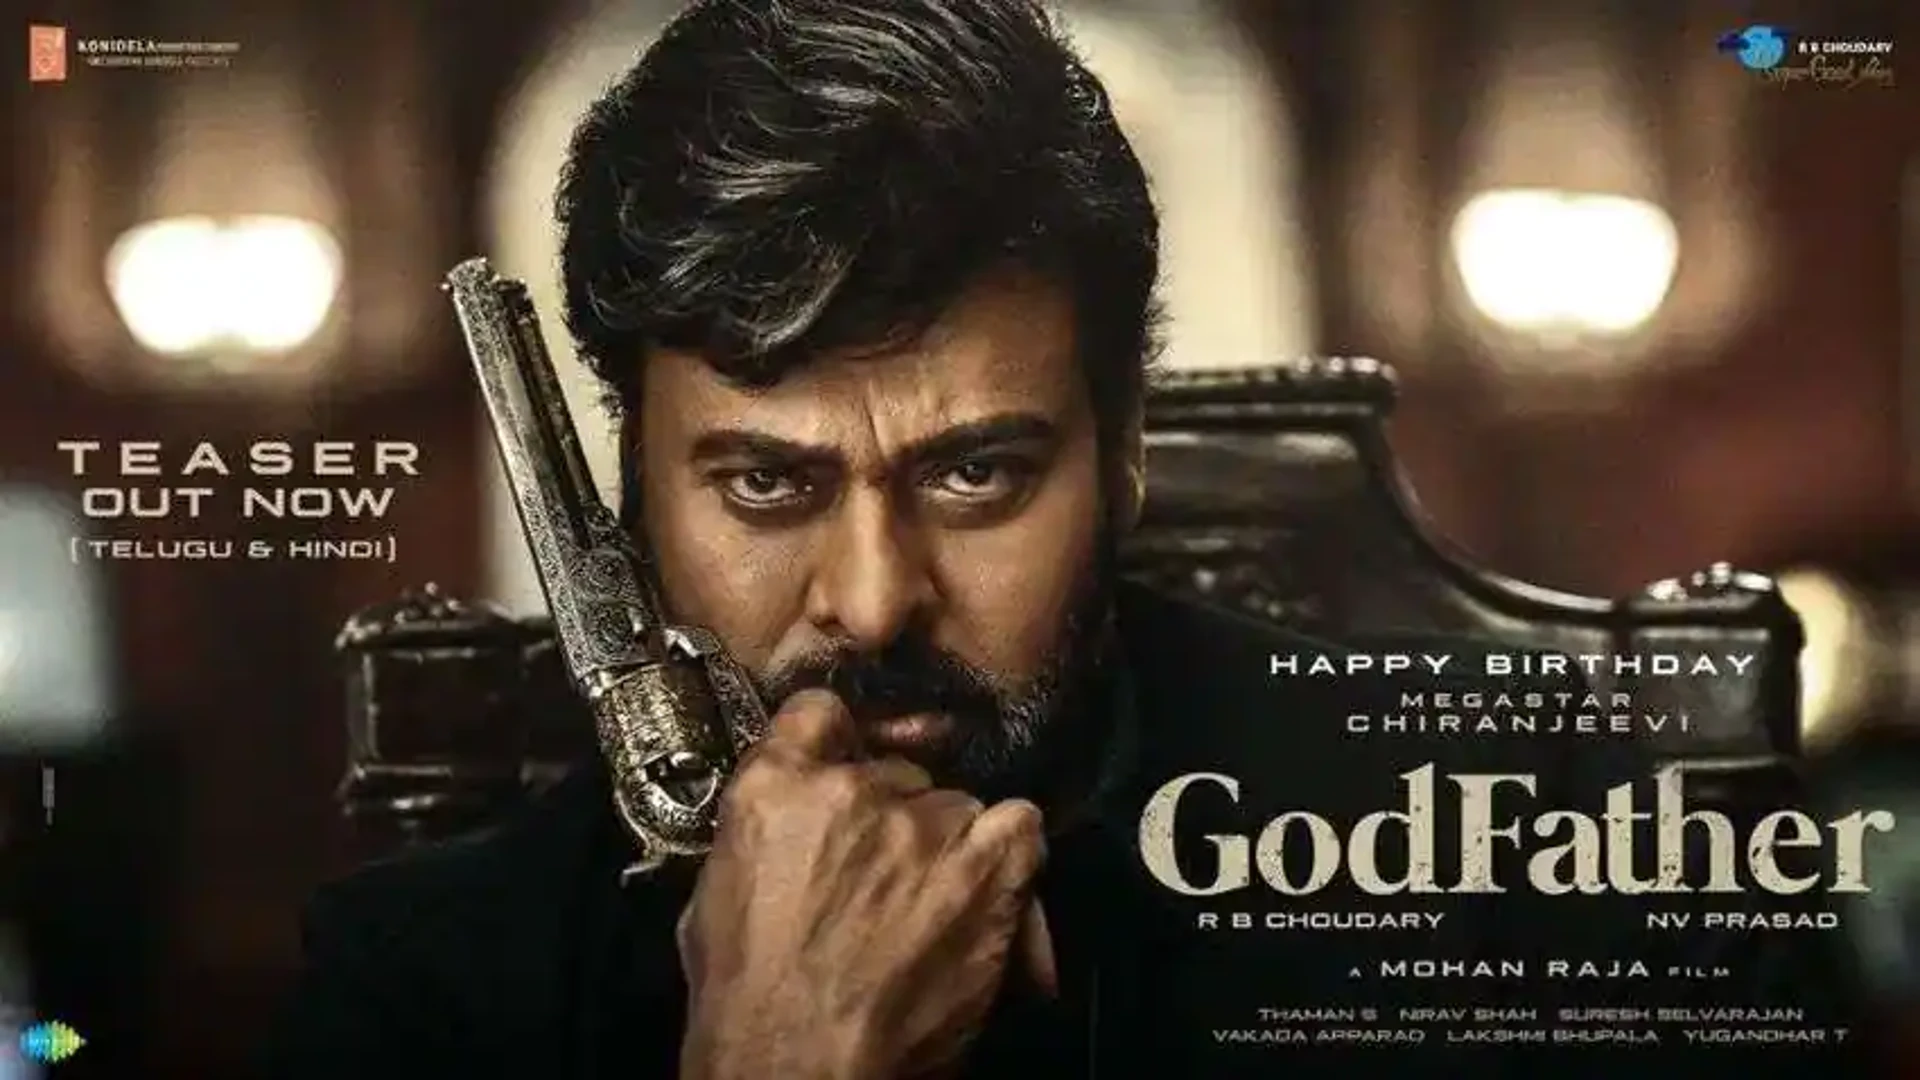 Chiranjeevi’s blockbuster film “GodFather” continues to roar at the Box Office